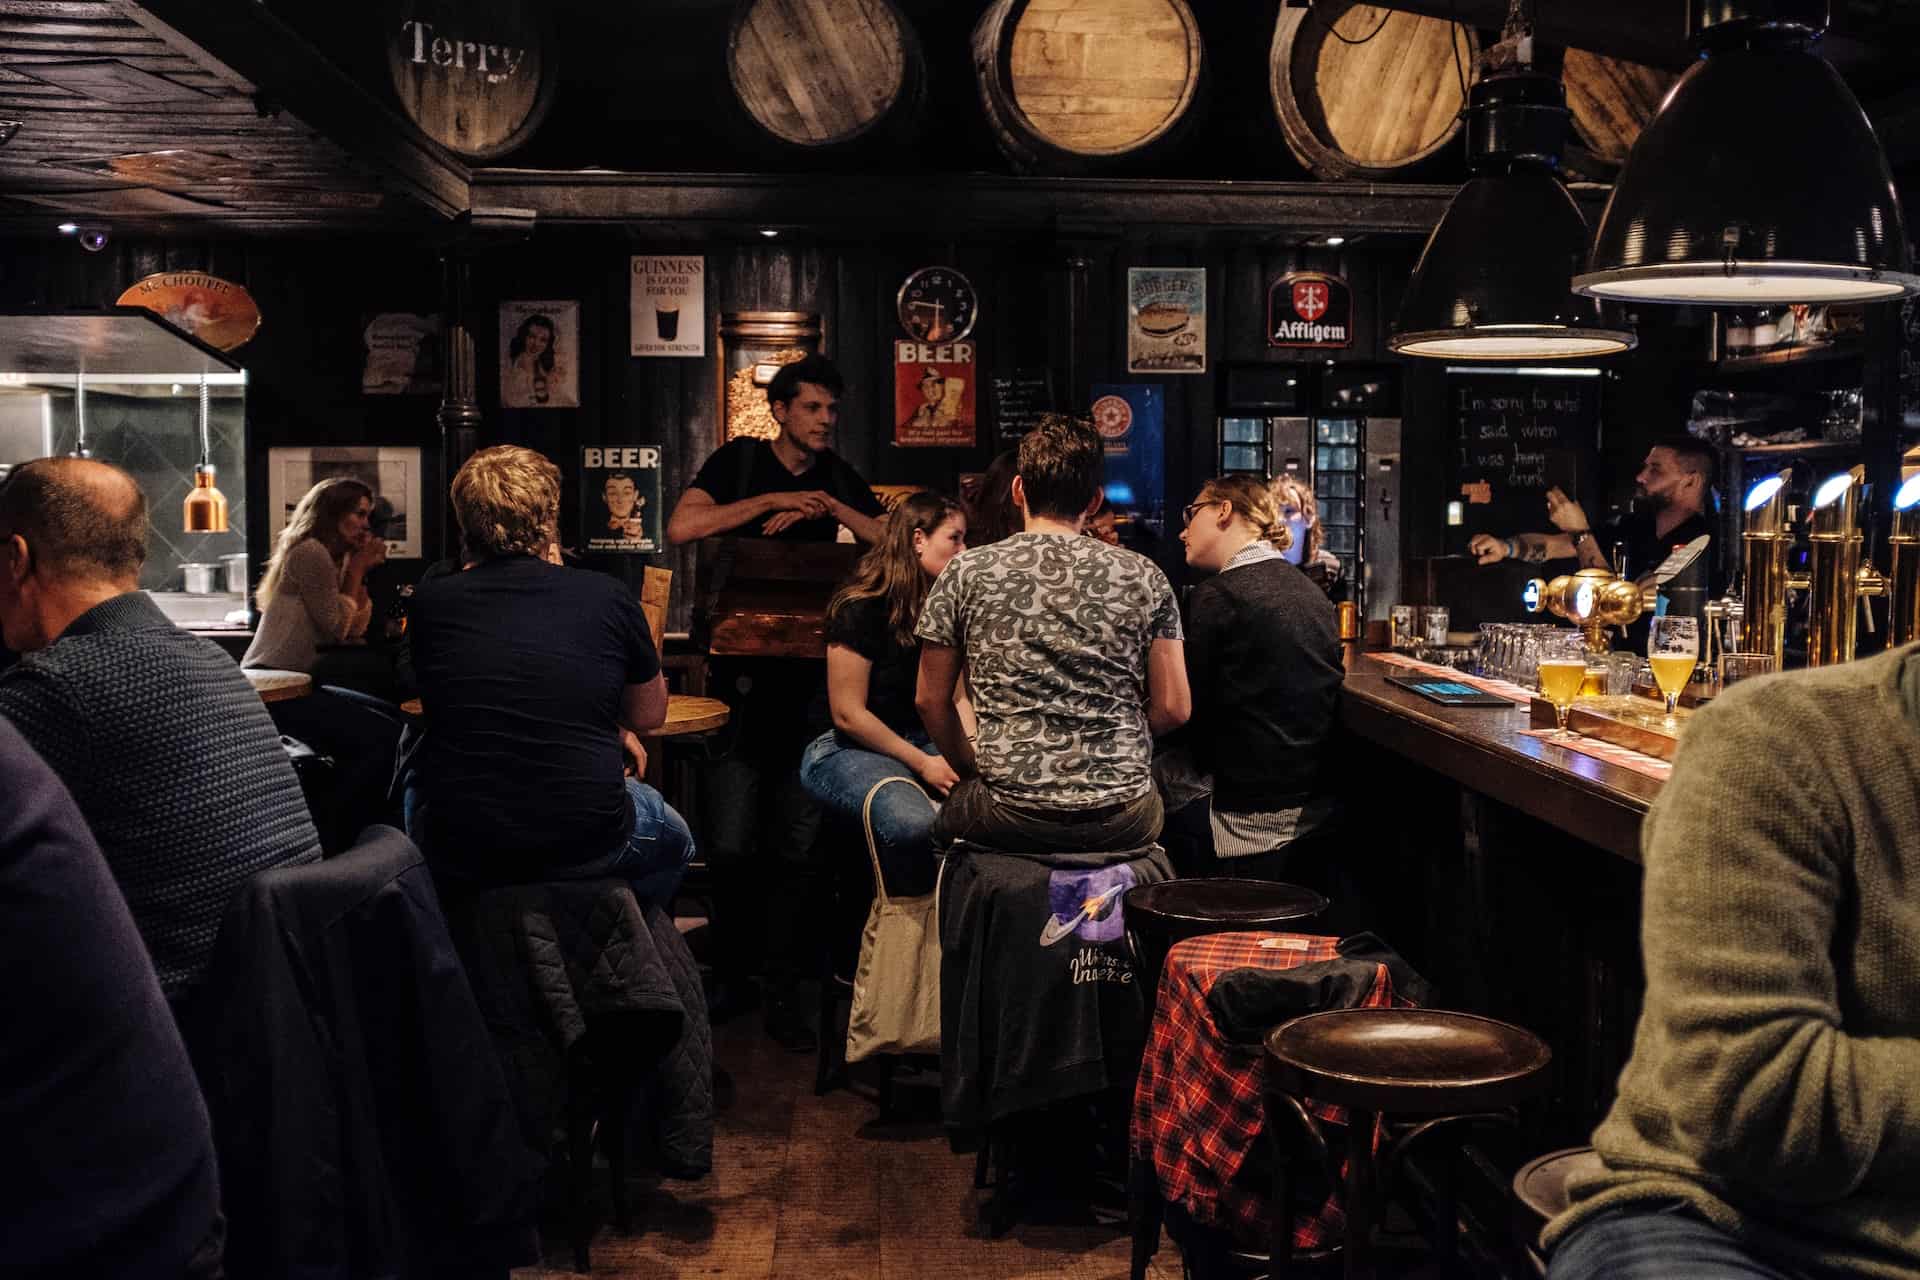 With the Craft Drinks Passport and Beer Club, you can make friends anywhere